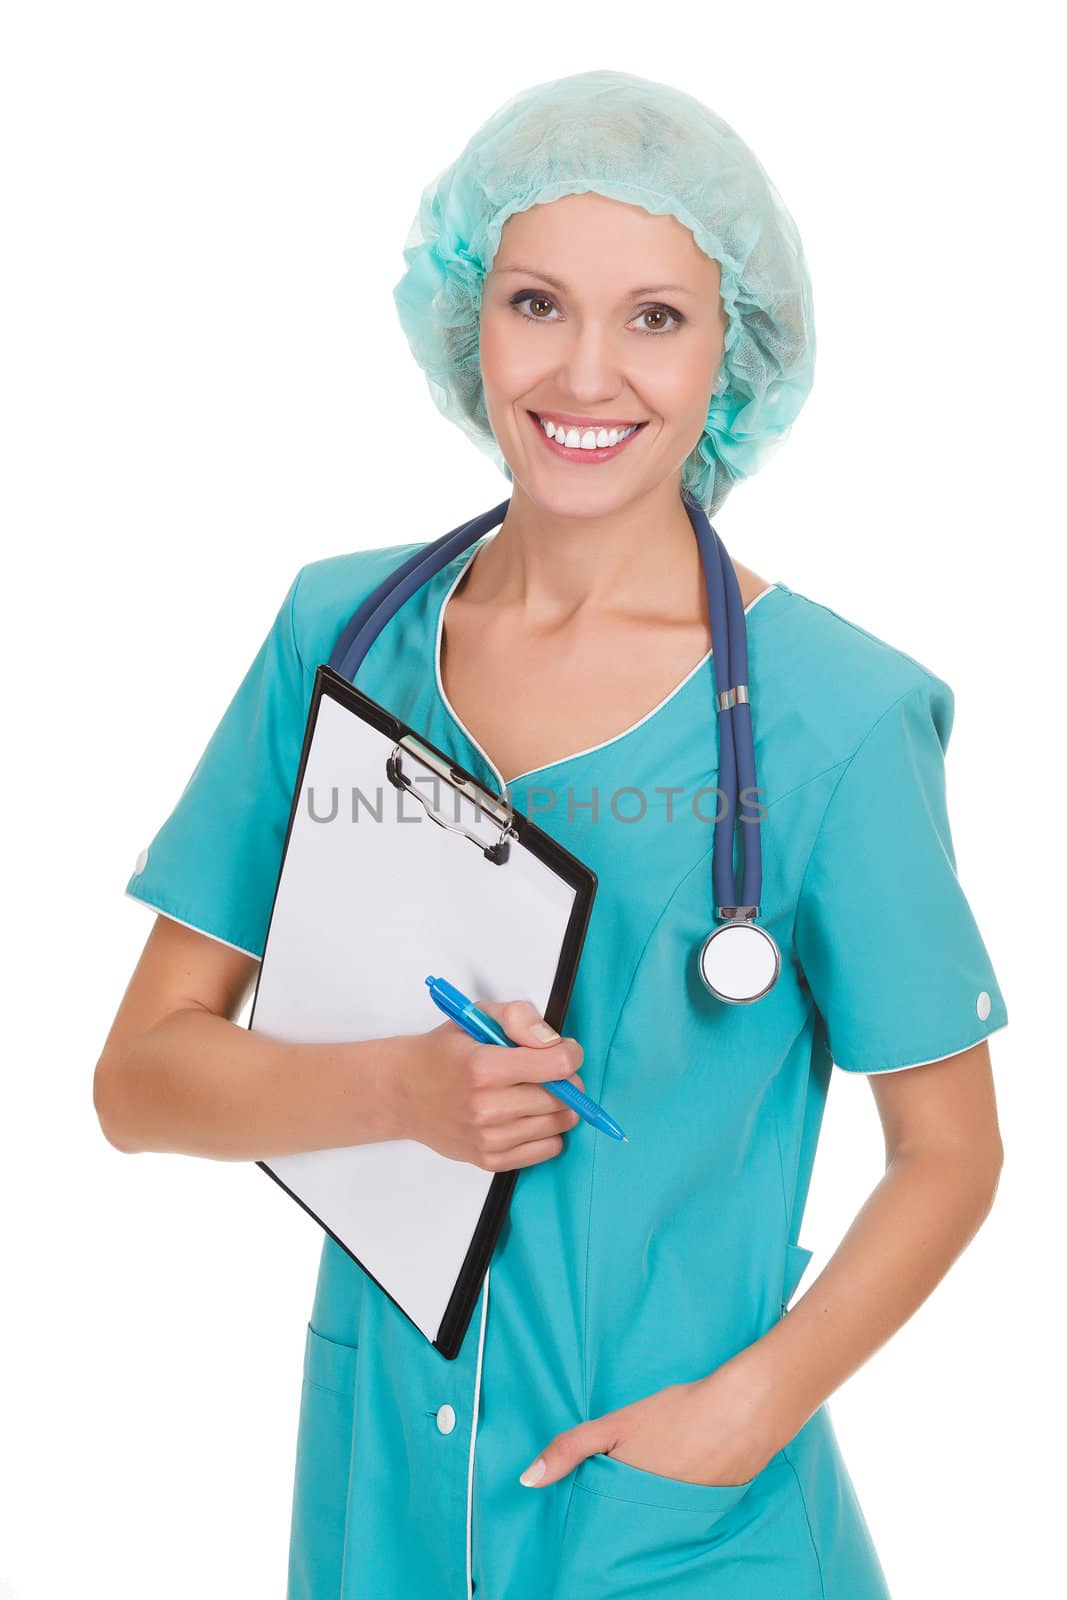 Smiling medical doctor woman with stethoscope and clipboard by Nobilior